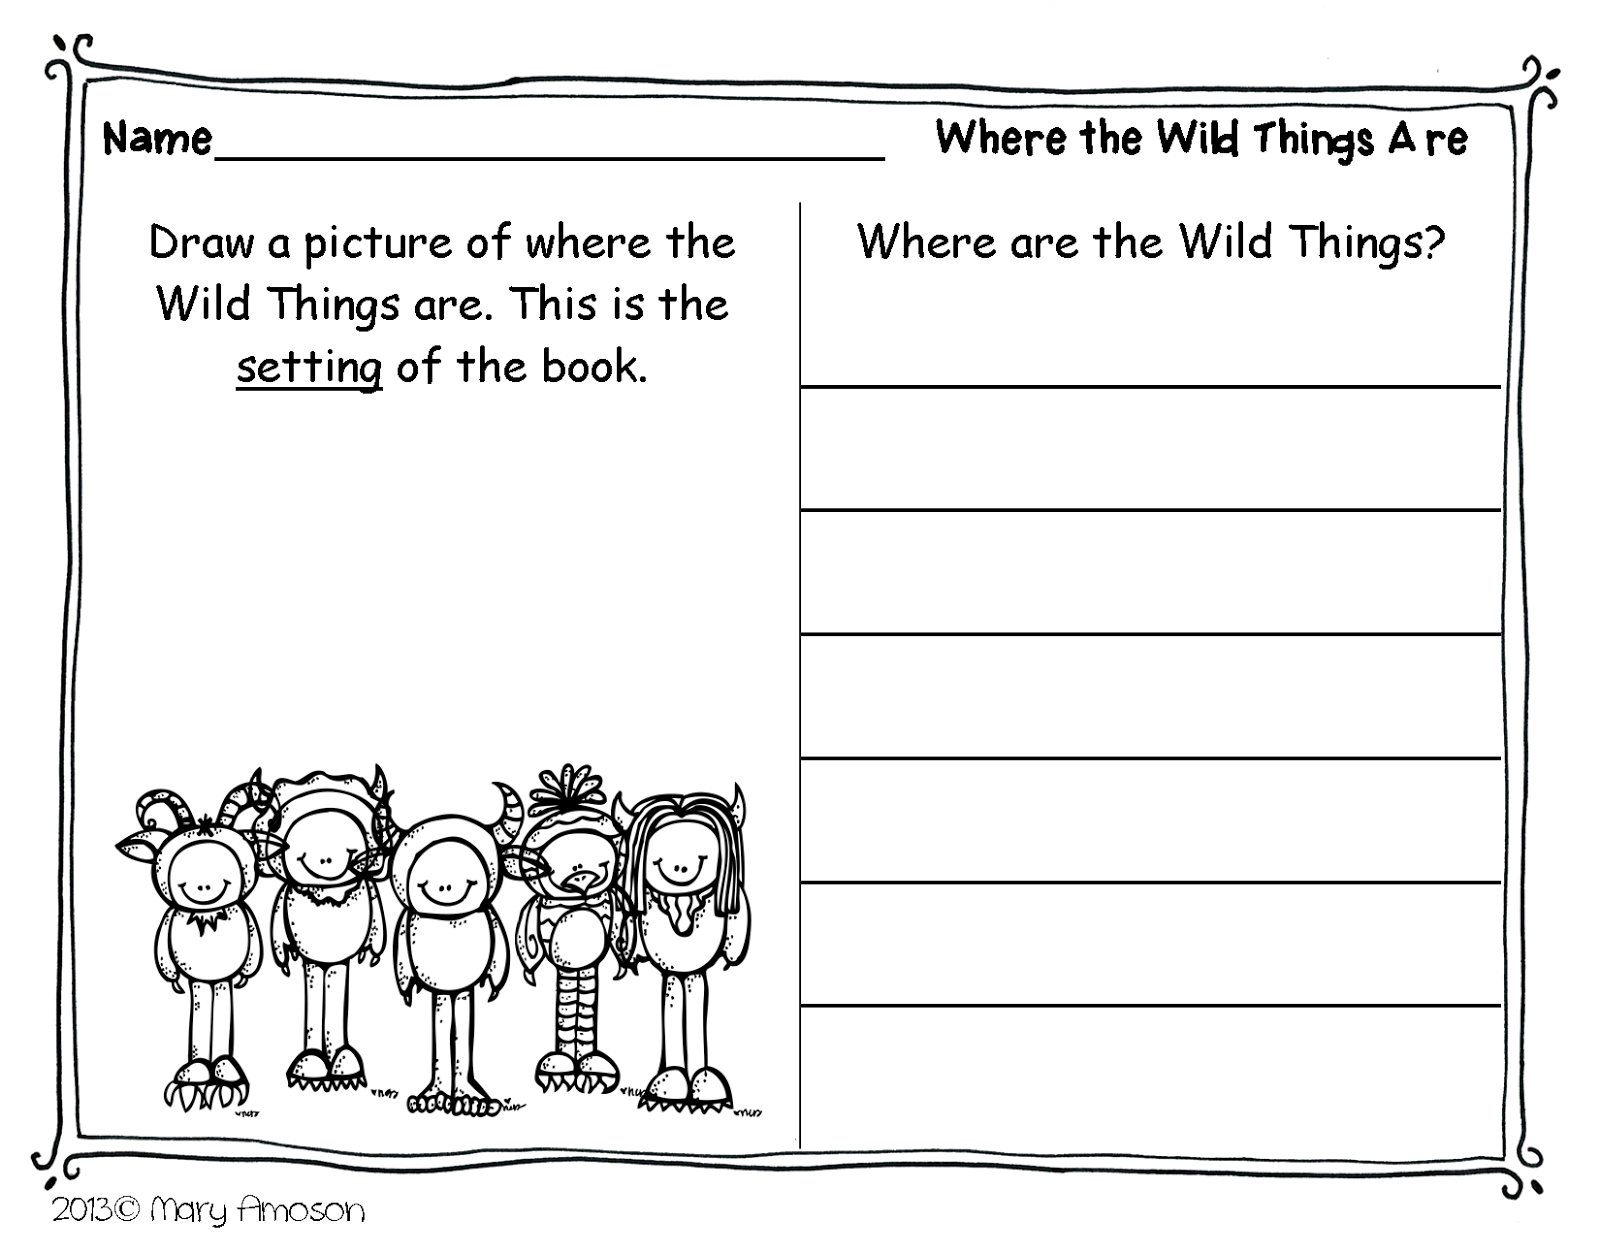 where-the-wild-things-are-worksheets-printable-printable-worksheets